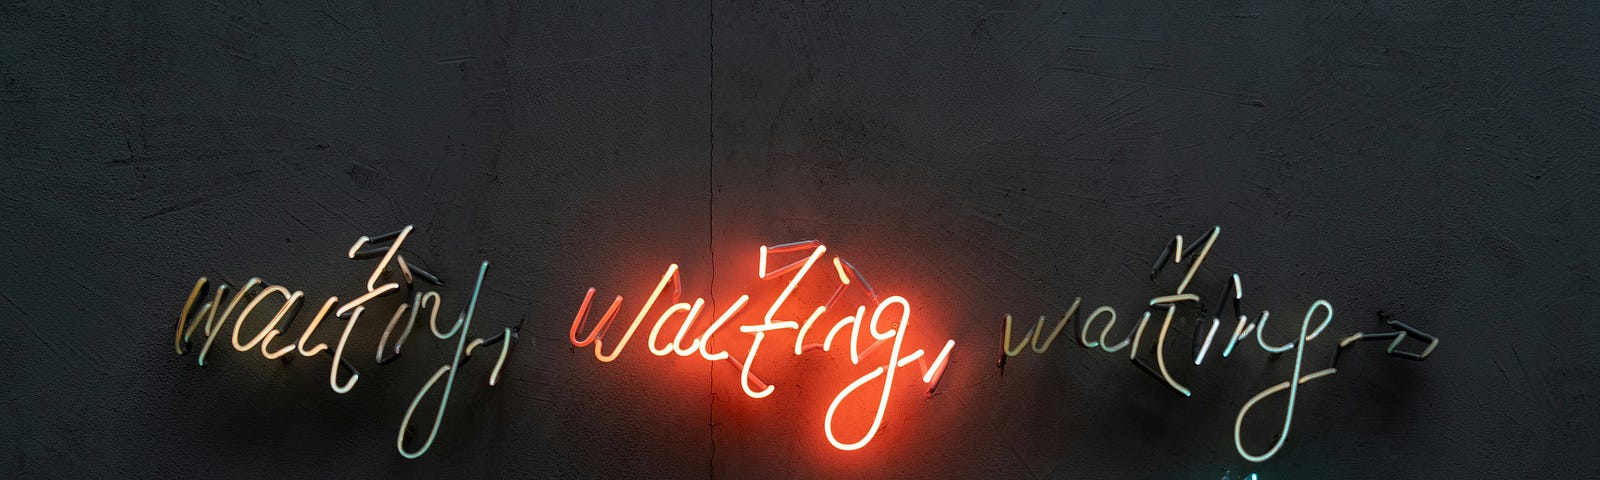 neon signs of waiting